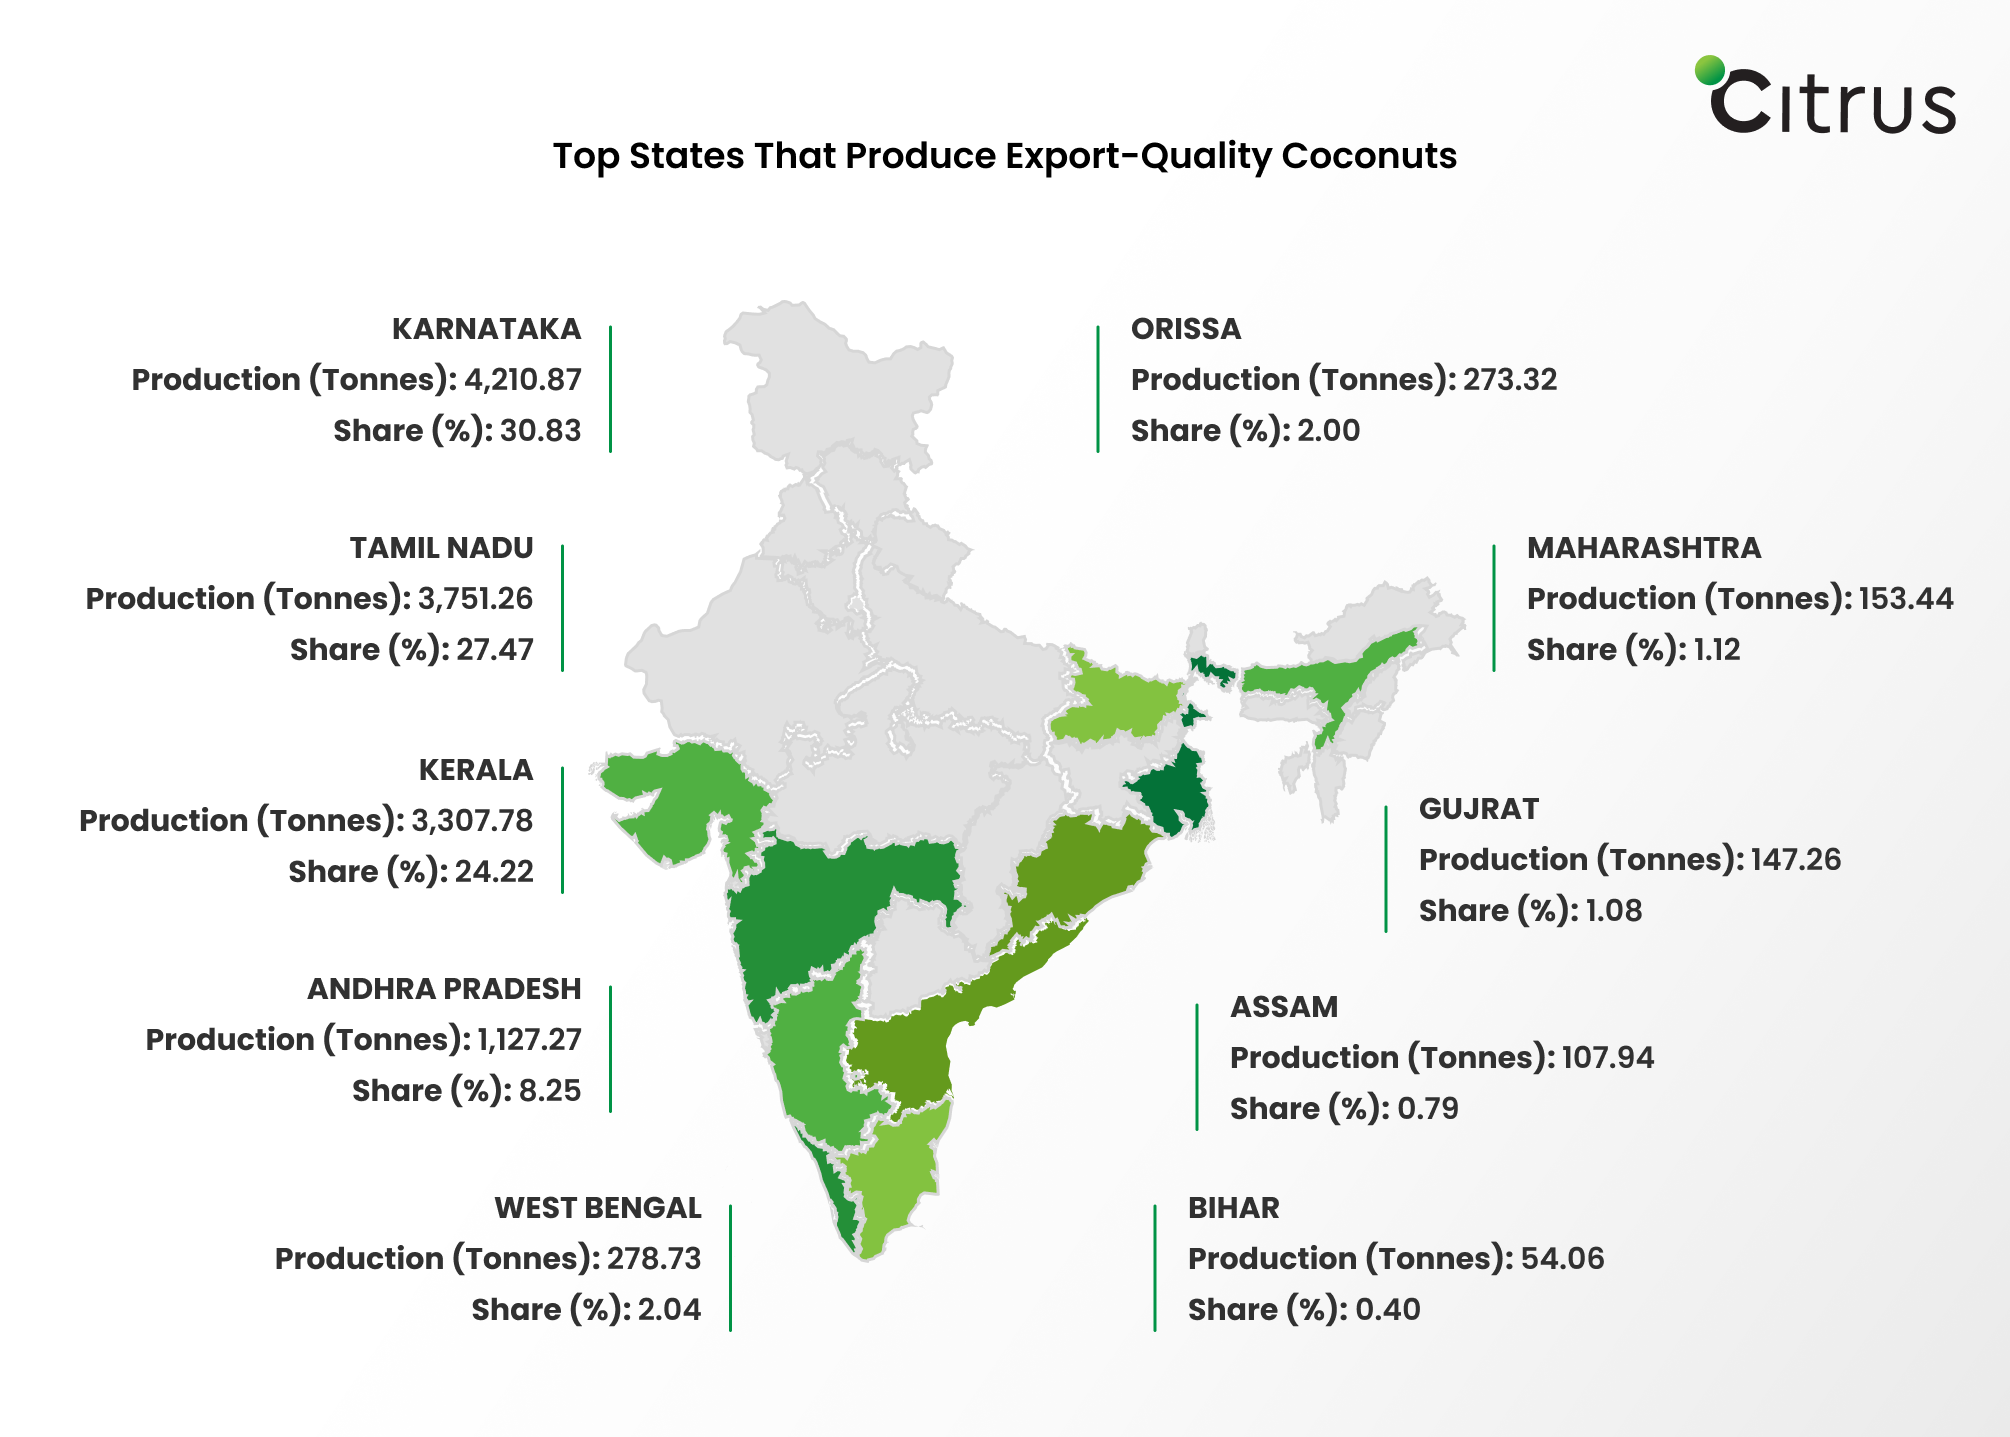 Top 10 States That Produce Export-Quality Coconuts
								  